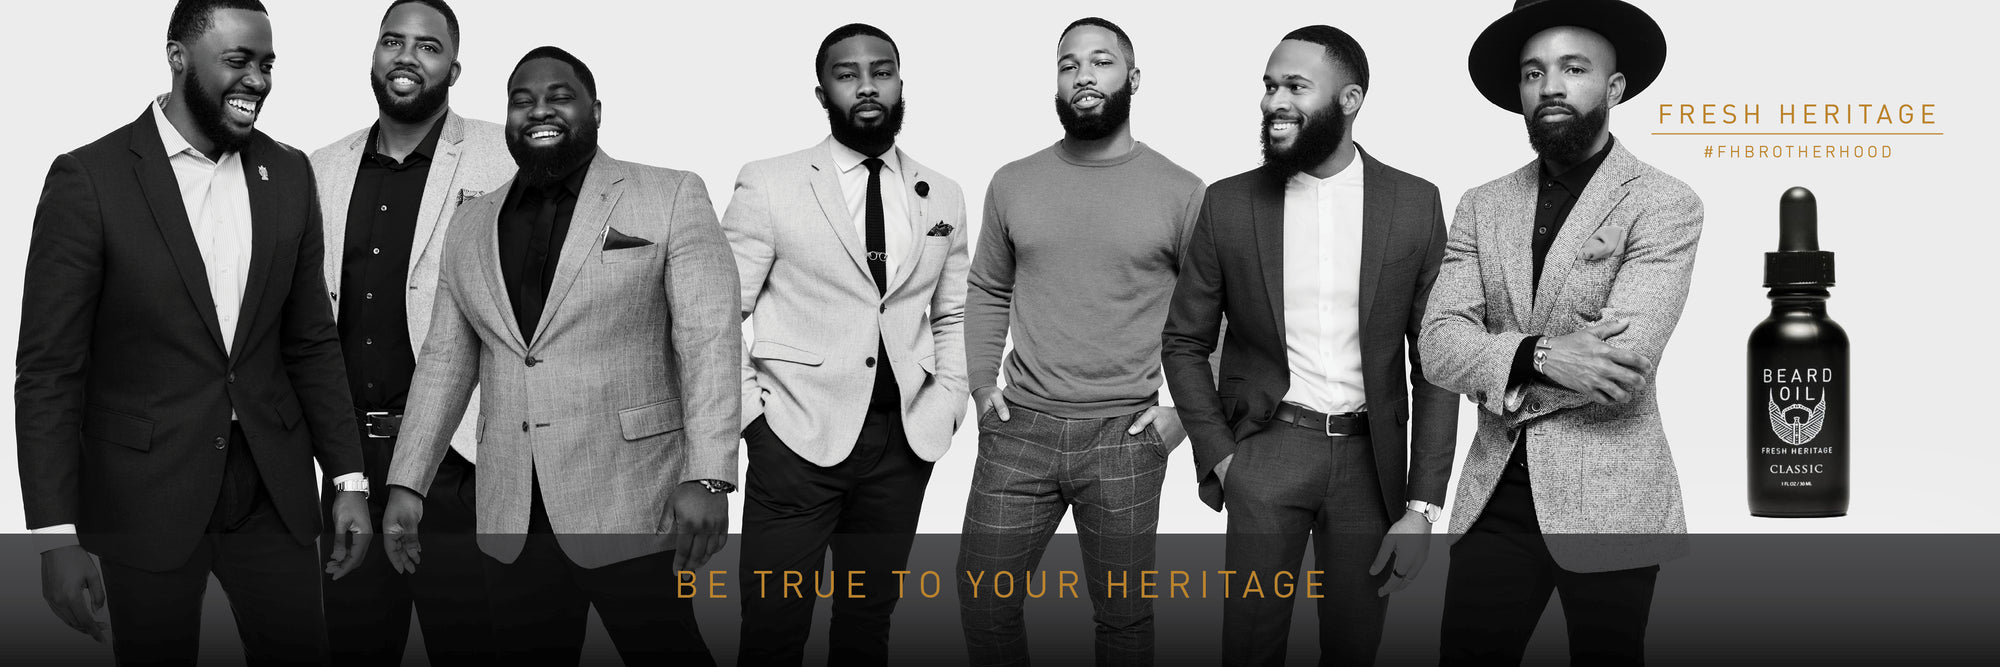 Black Fraternities: It’s More Than Just Stepping Continued...